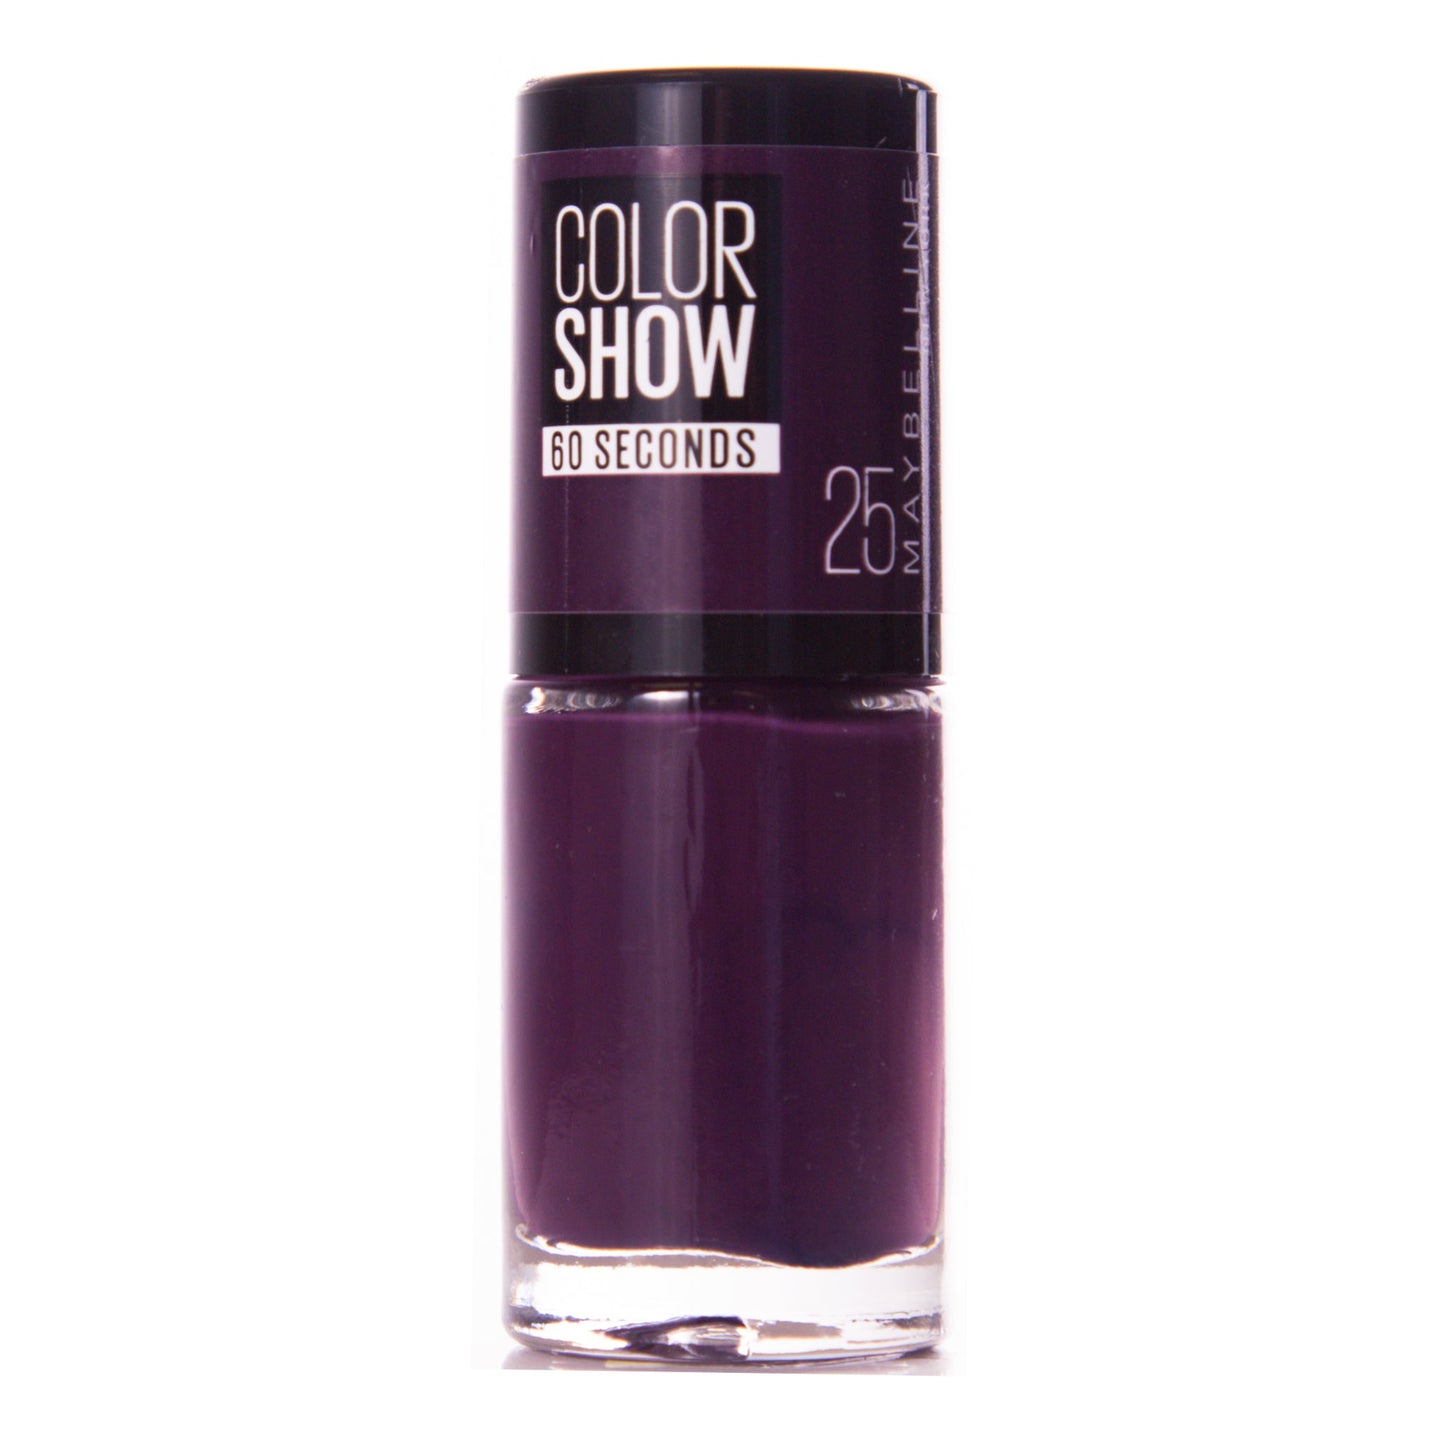 Maybelline Color Show Nail Polish - Plump It Up